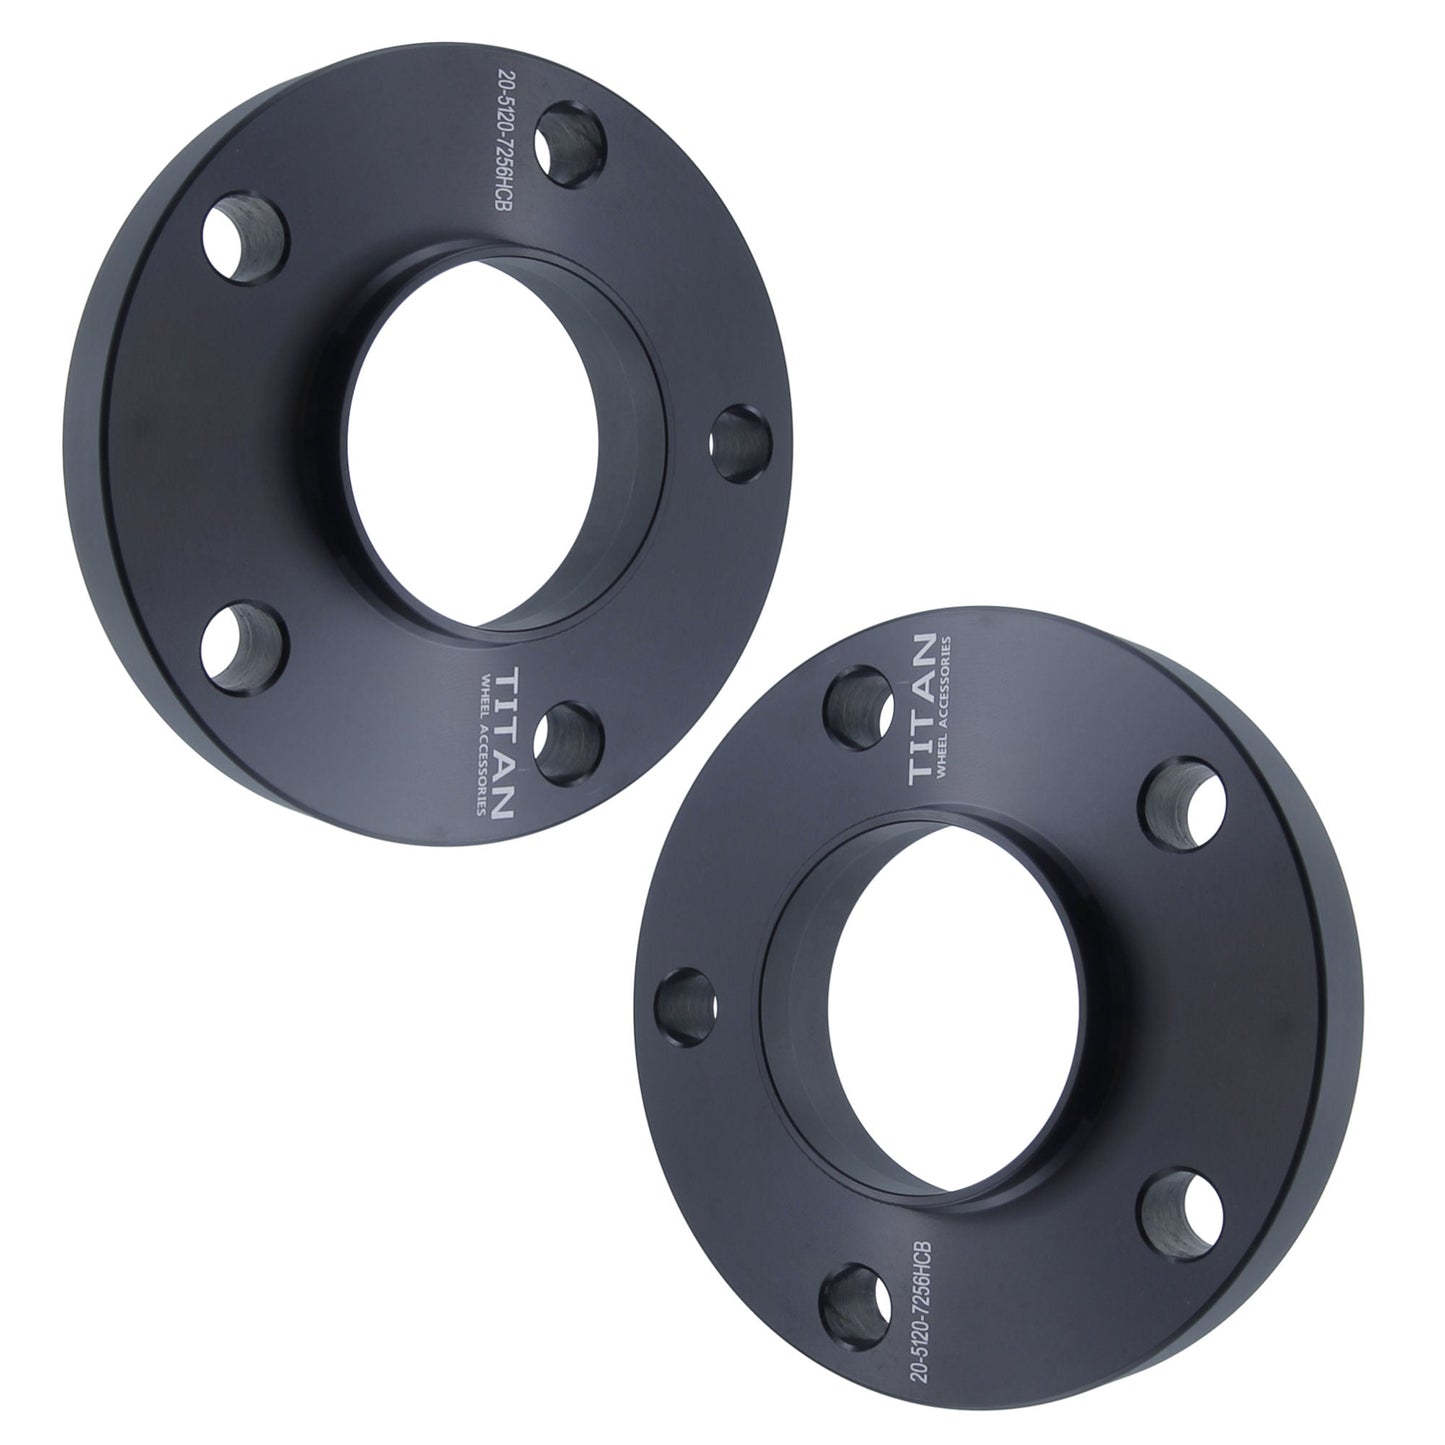 15mm Titan Wheel Spacers for BMW 1 3 5 6 7 Series | 5x120 | 72.56 Hubcentric | Set of 4 | Titan Wheel Accessories